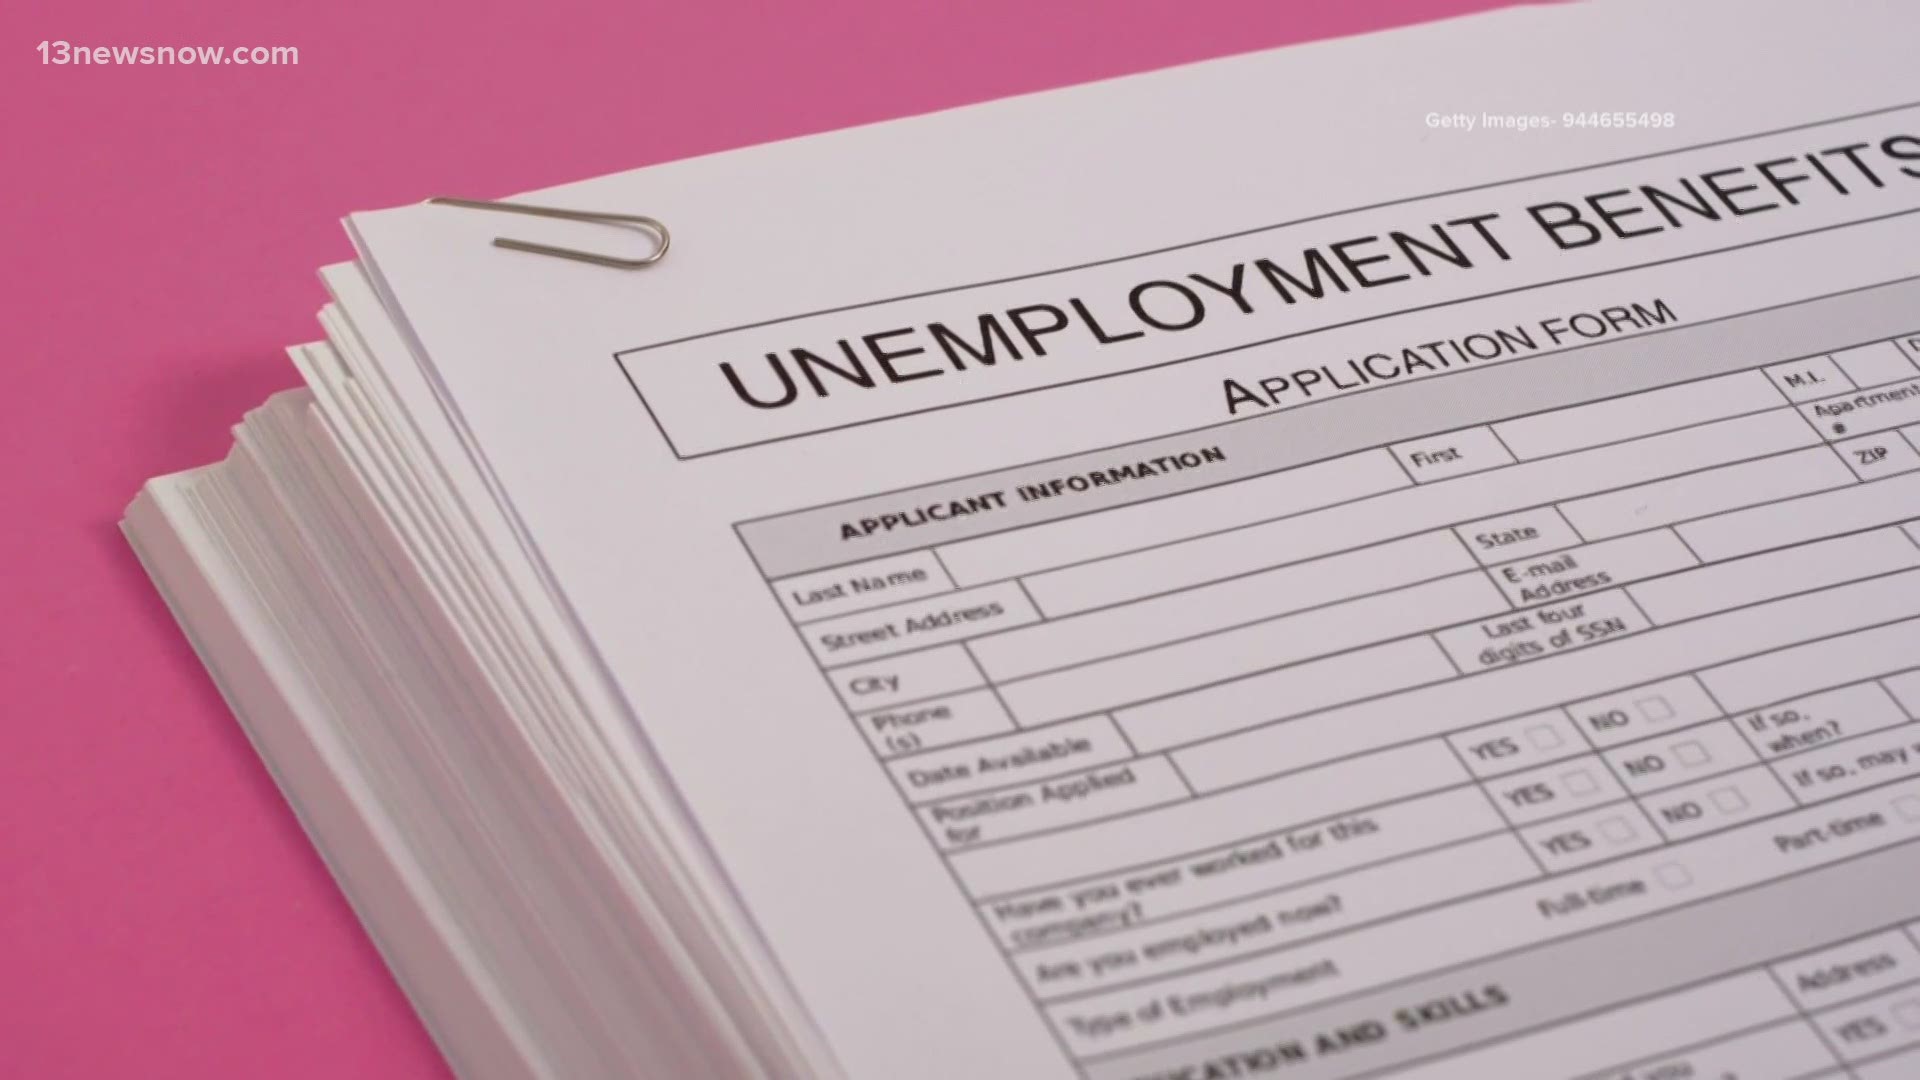 The Virginia Unemployment Commission ended the extended benefits program. This is making it hard for the many people still needing financial assistance.